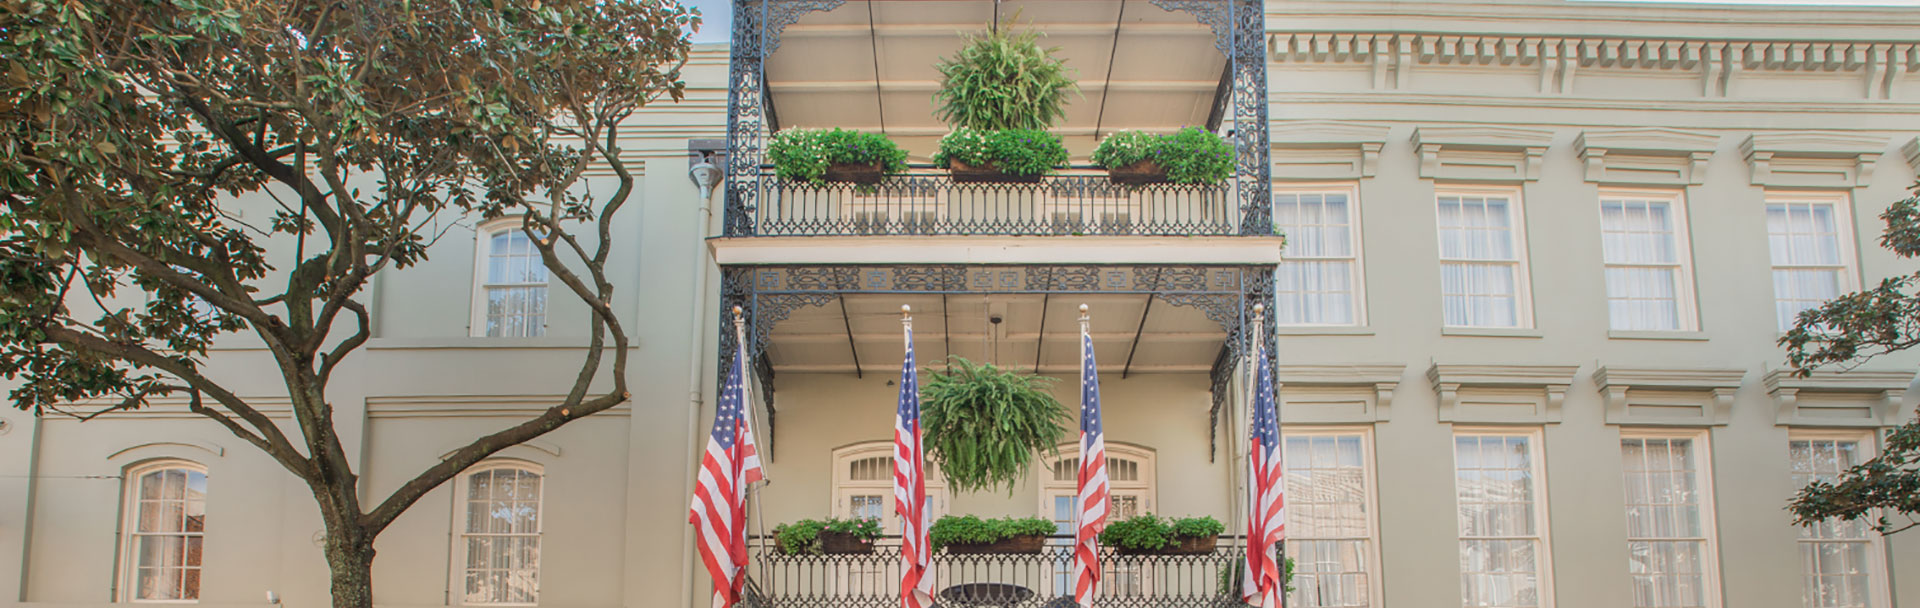 Bienville House in the French Quarter